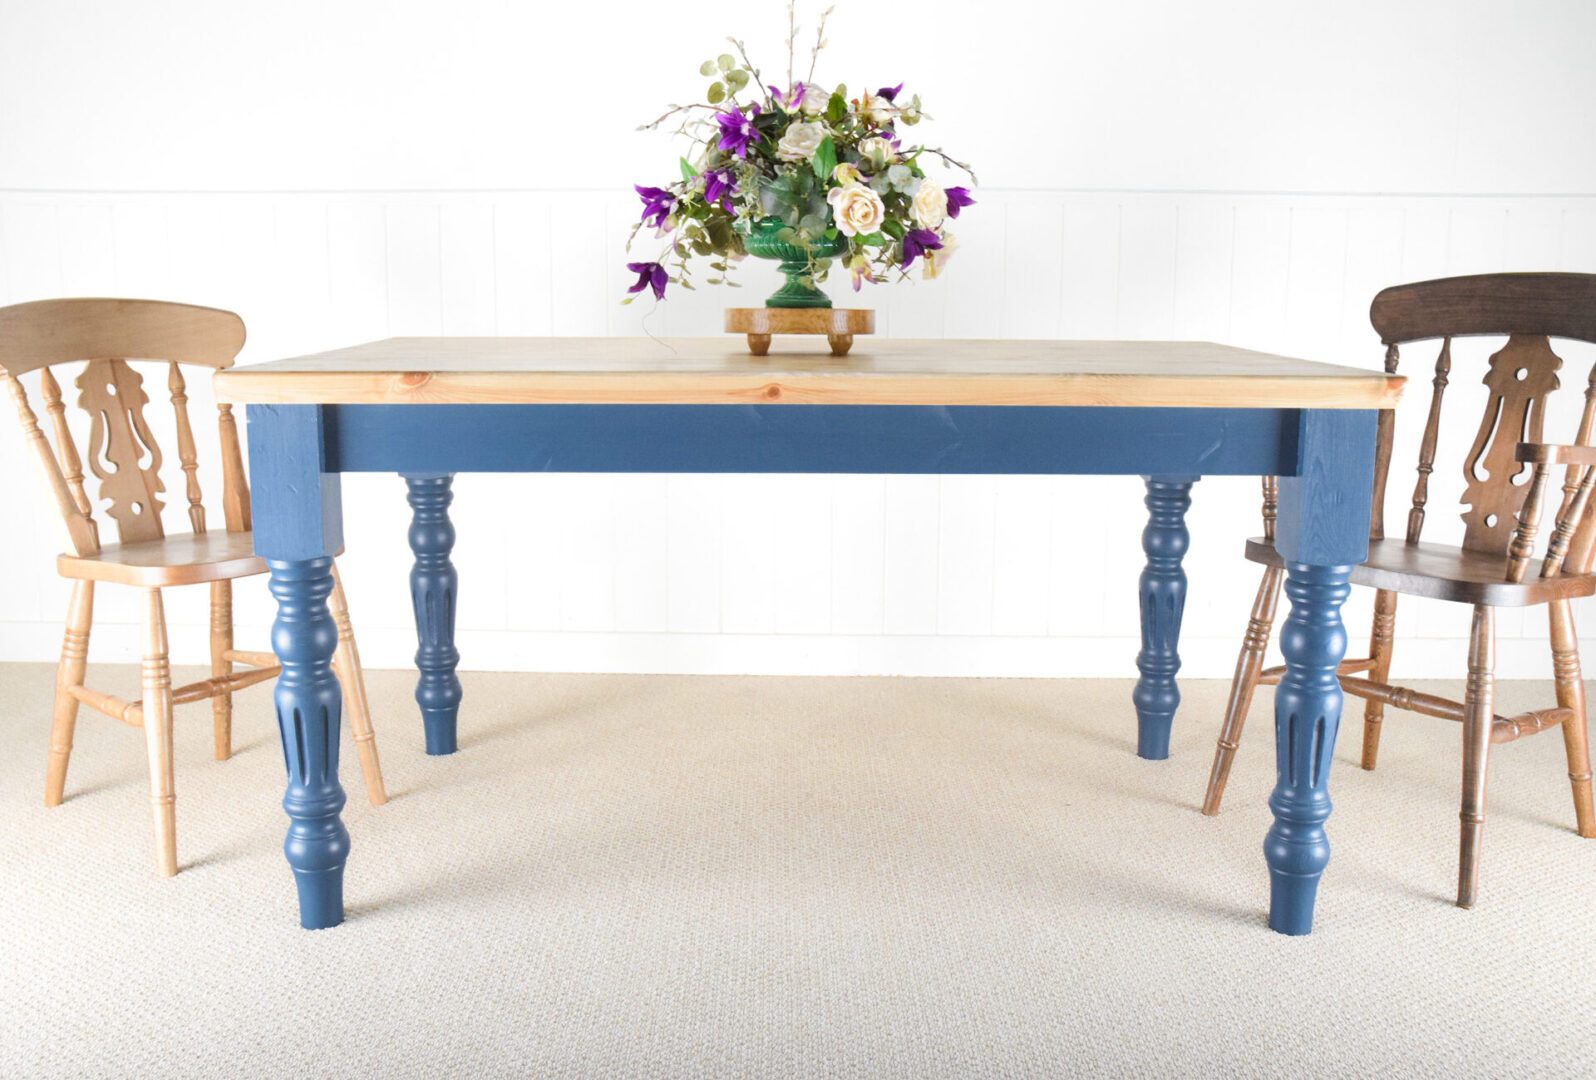 A blue table with flowers in the middle of it